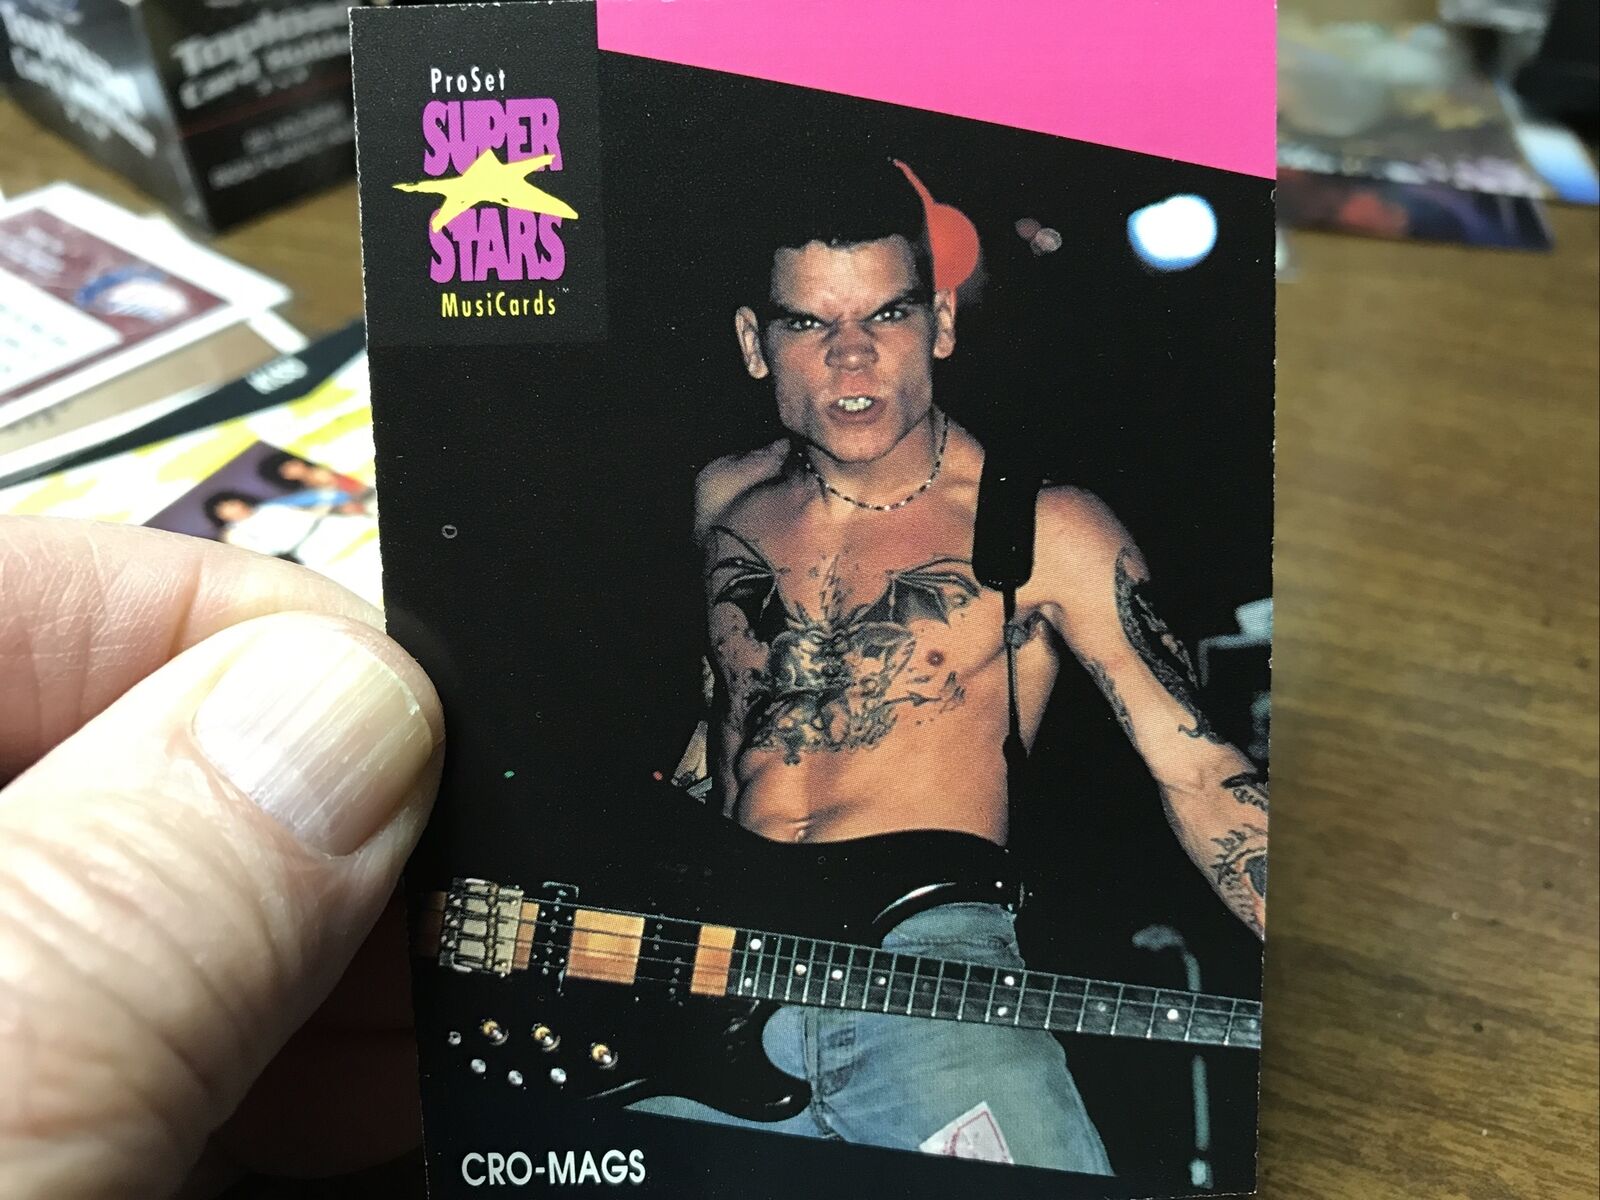 CRO-MAGS TRADING Card Price reduction from 1991 # Max 65% OFF SuperStars ProSet - MusiCards